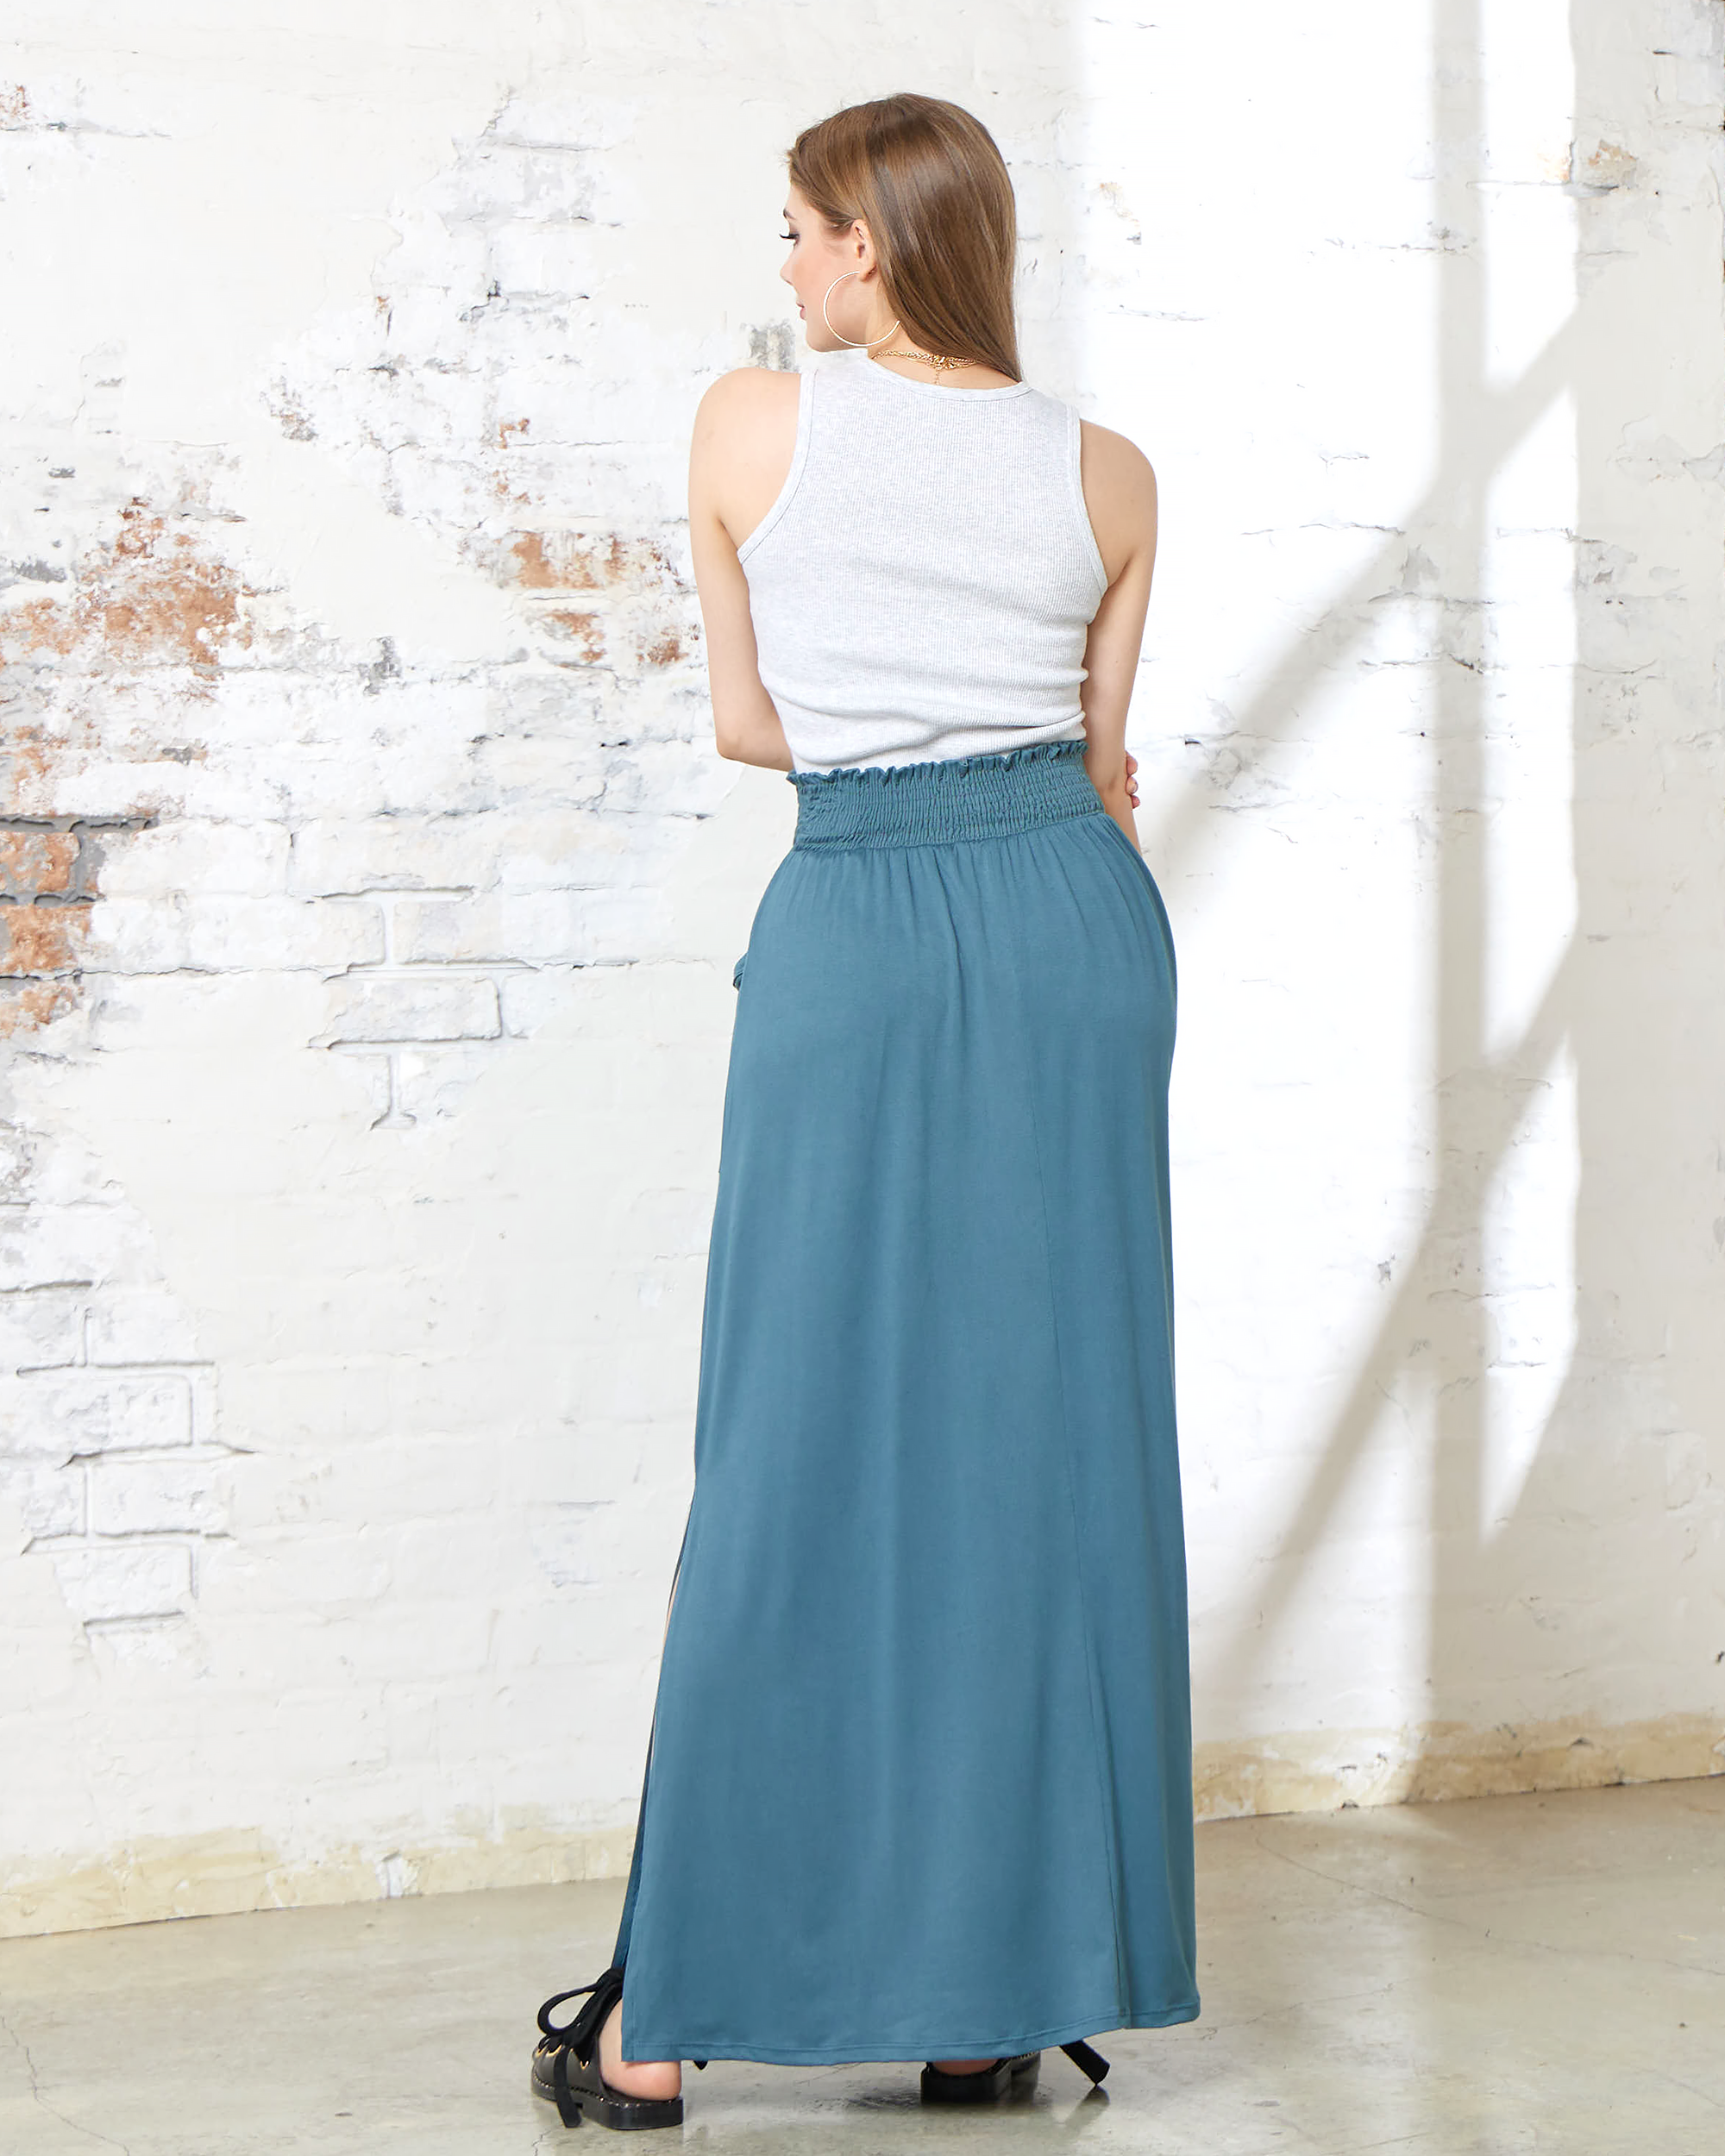 Antique Blue Maxi Skirt - Smocked Waist & Patched Pockets